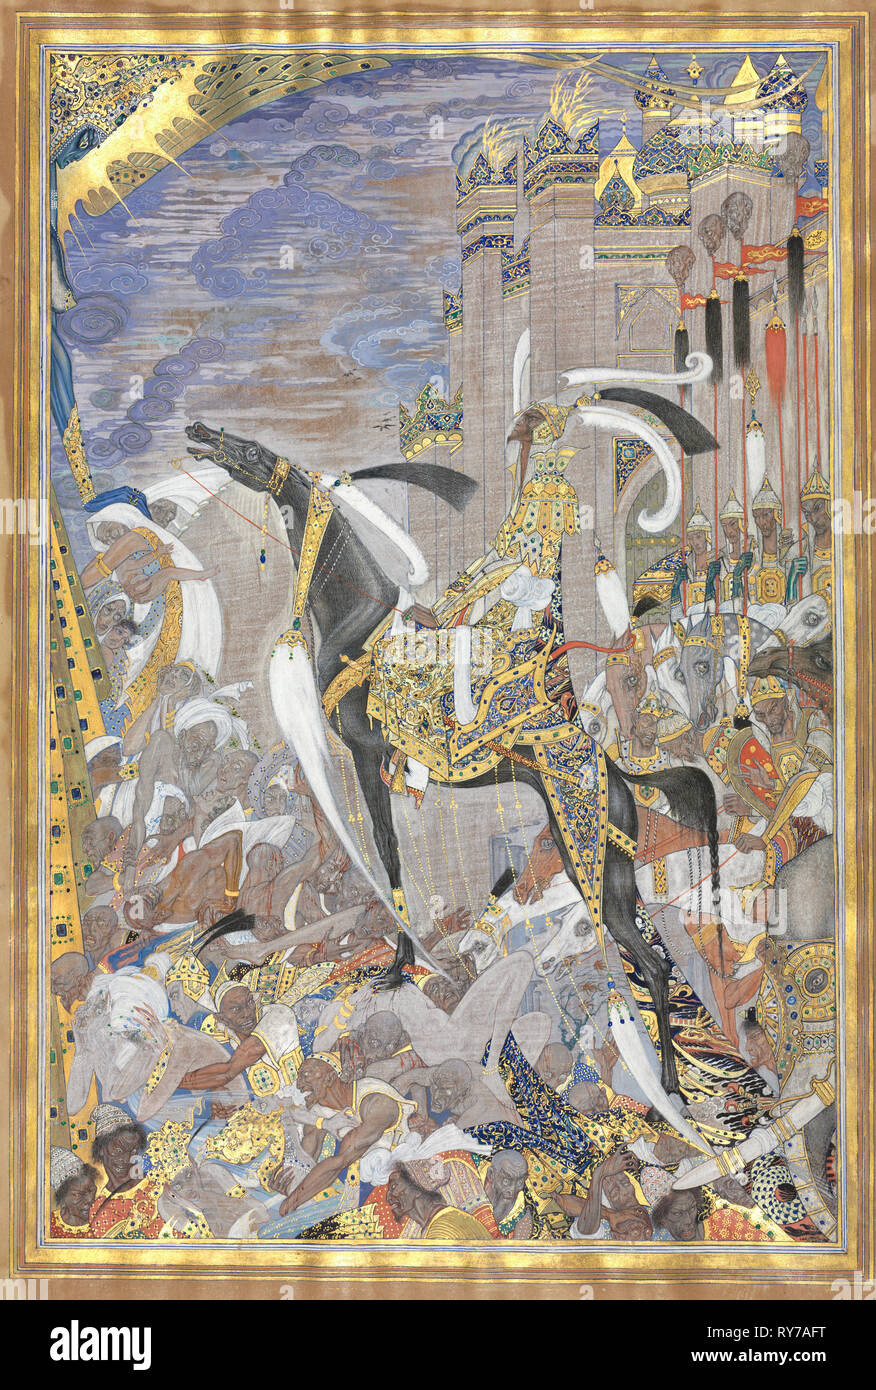 Victorious Army Entering City After Siege, 1700s-1800s(?). Pakistan (?), 20th century. Opaque watercolor on paper; sheet: 48.1 x 32.8 cm (18 15/16 x 12 15/16 in.); image: 41.5 x 27.4 cm (16 5/16 x 10 13/16 in Stock Photo